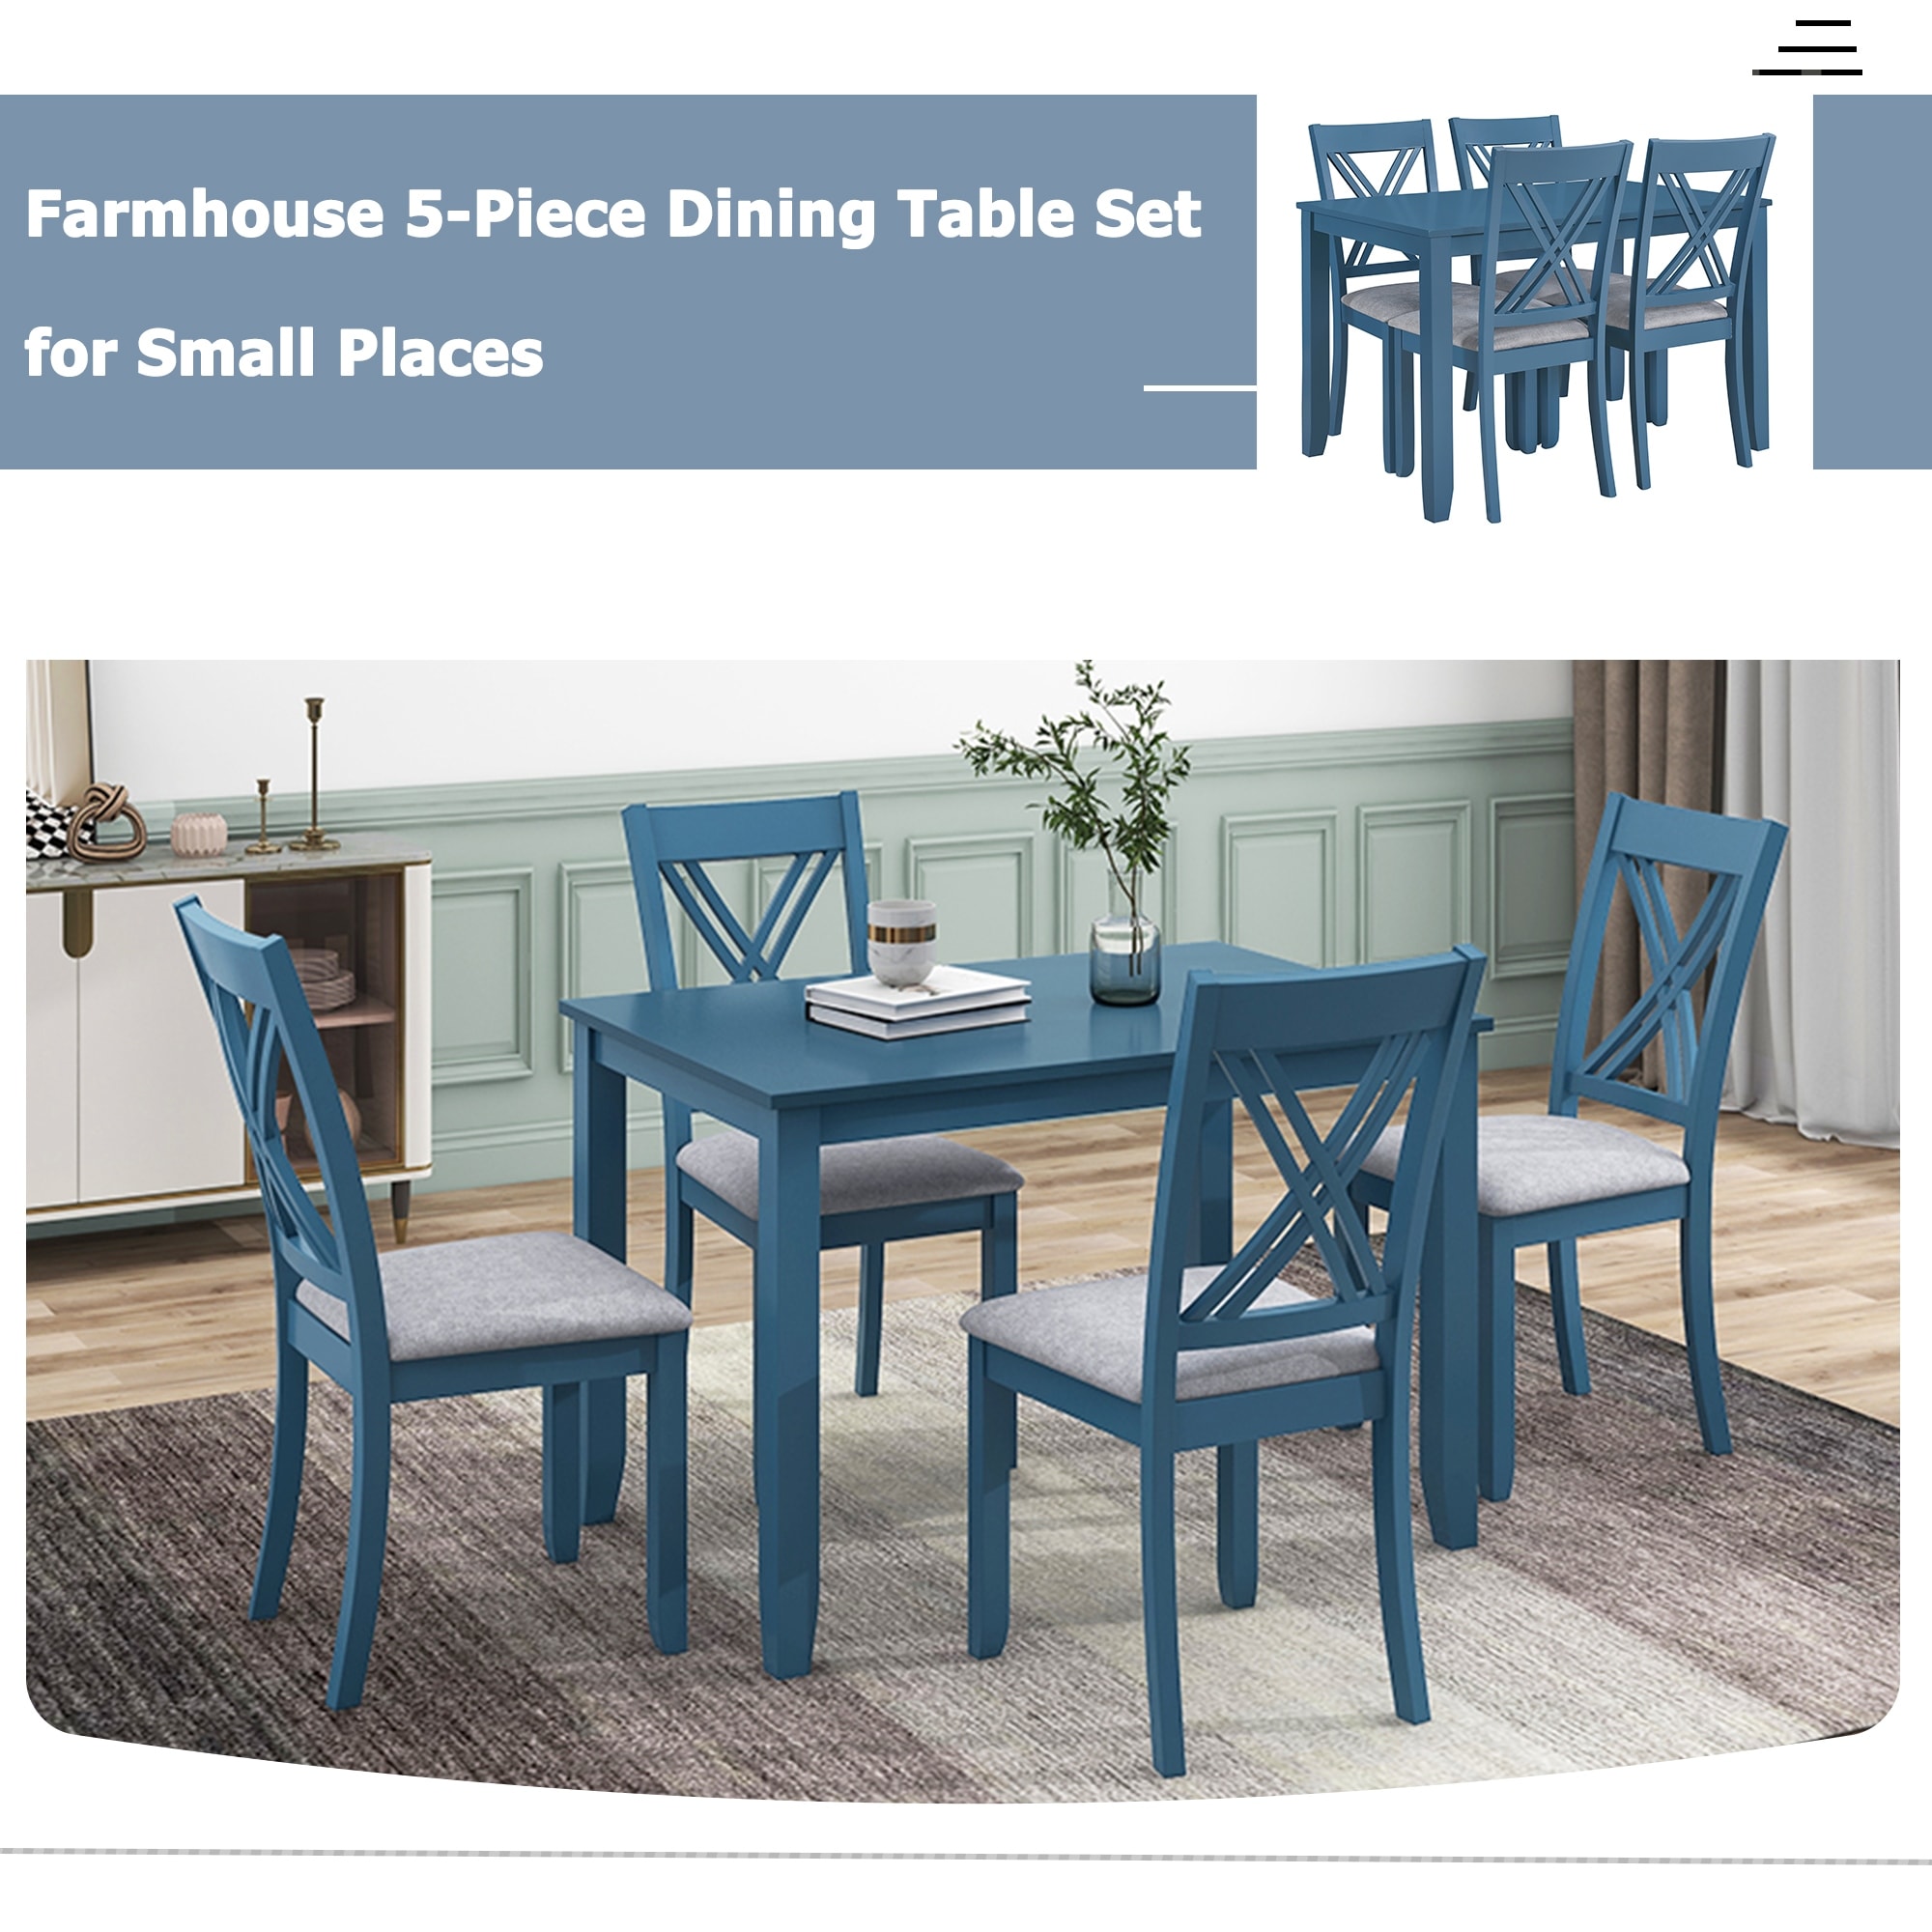 https://ak1.ostkcdn.com/images/products/is/images/direct/9707befdfd38d411633969baa778845995009583/Farmhouse-5-Piece-Wood-Dining-Set-with-Rectangular-Table-and-X-Back-Upholstered-Chairs-for-Living-Room.jpg